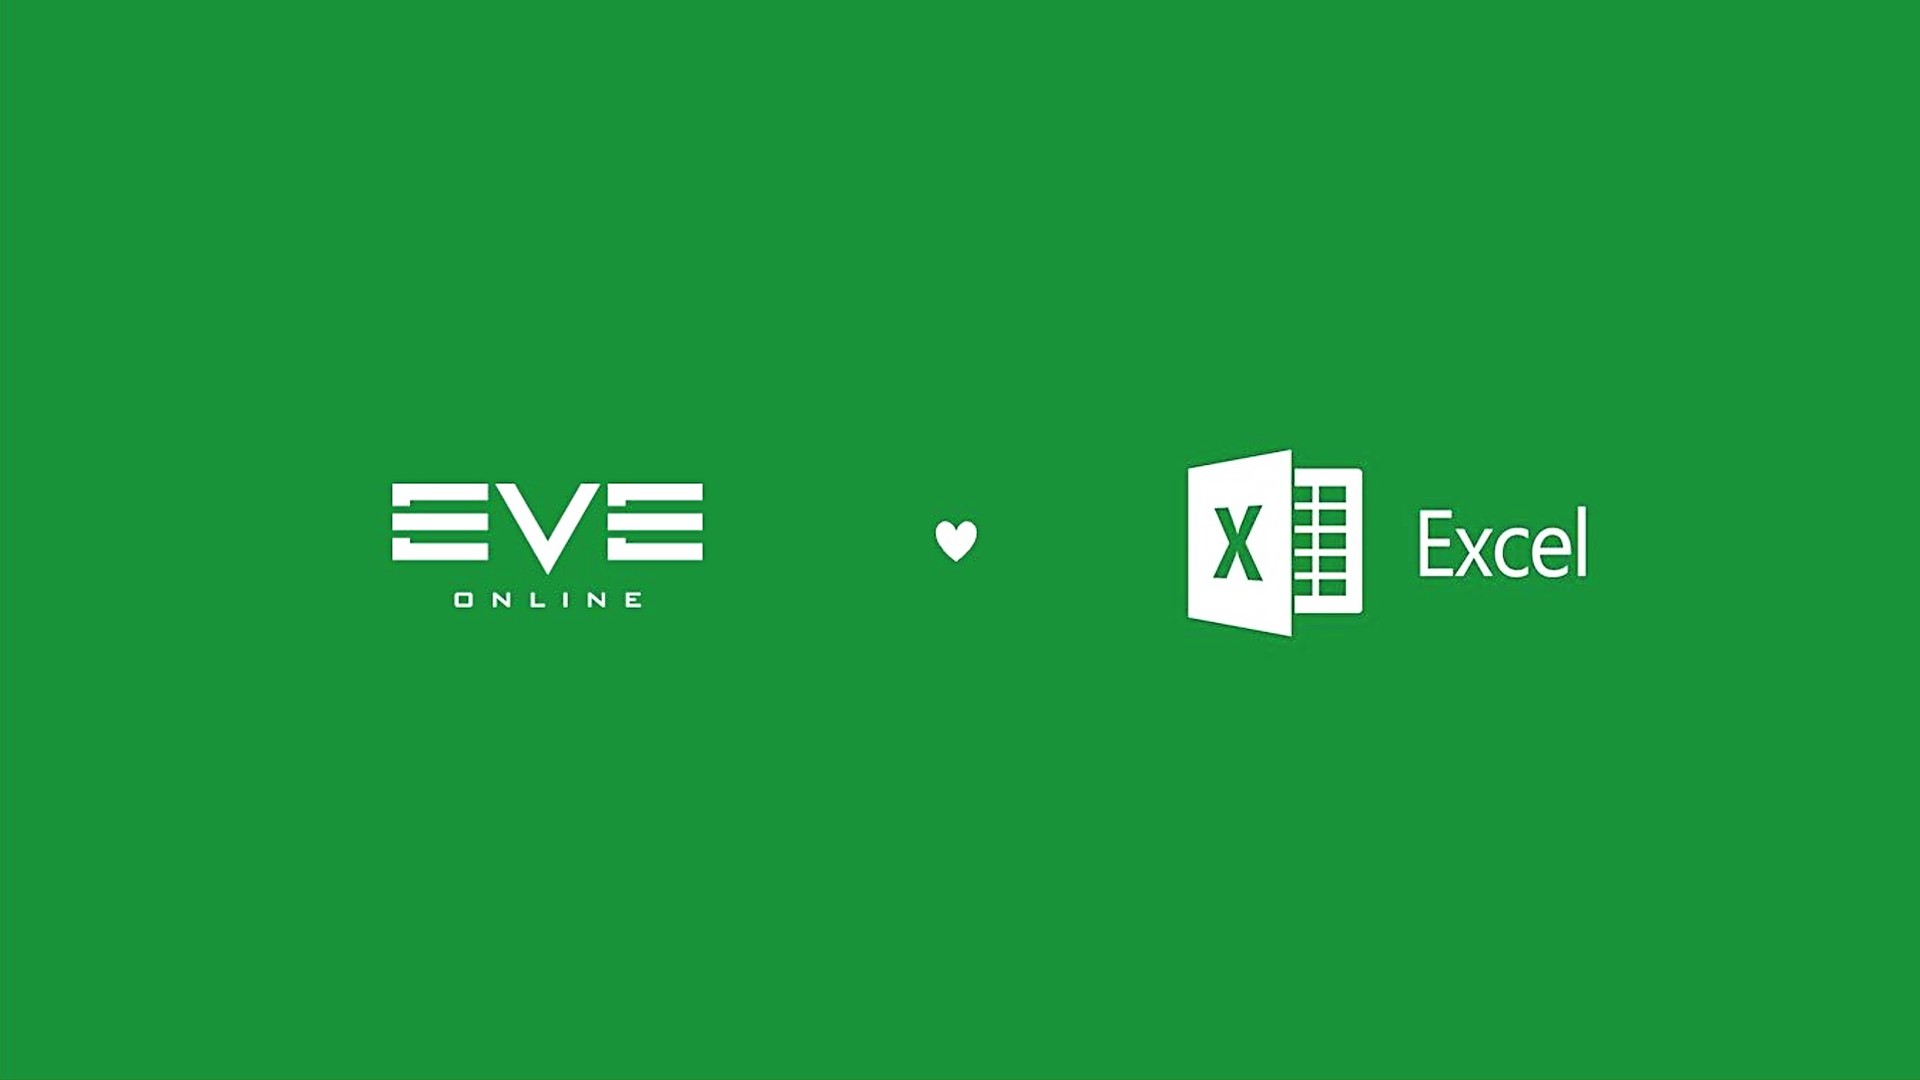 Eve Online is finally teaming up with Microsoft Excel